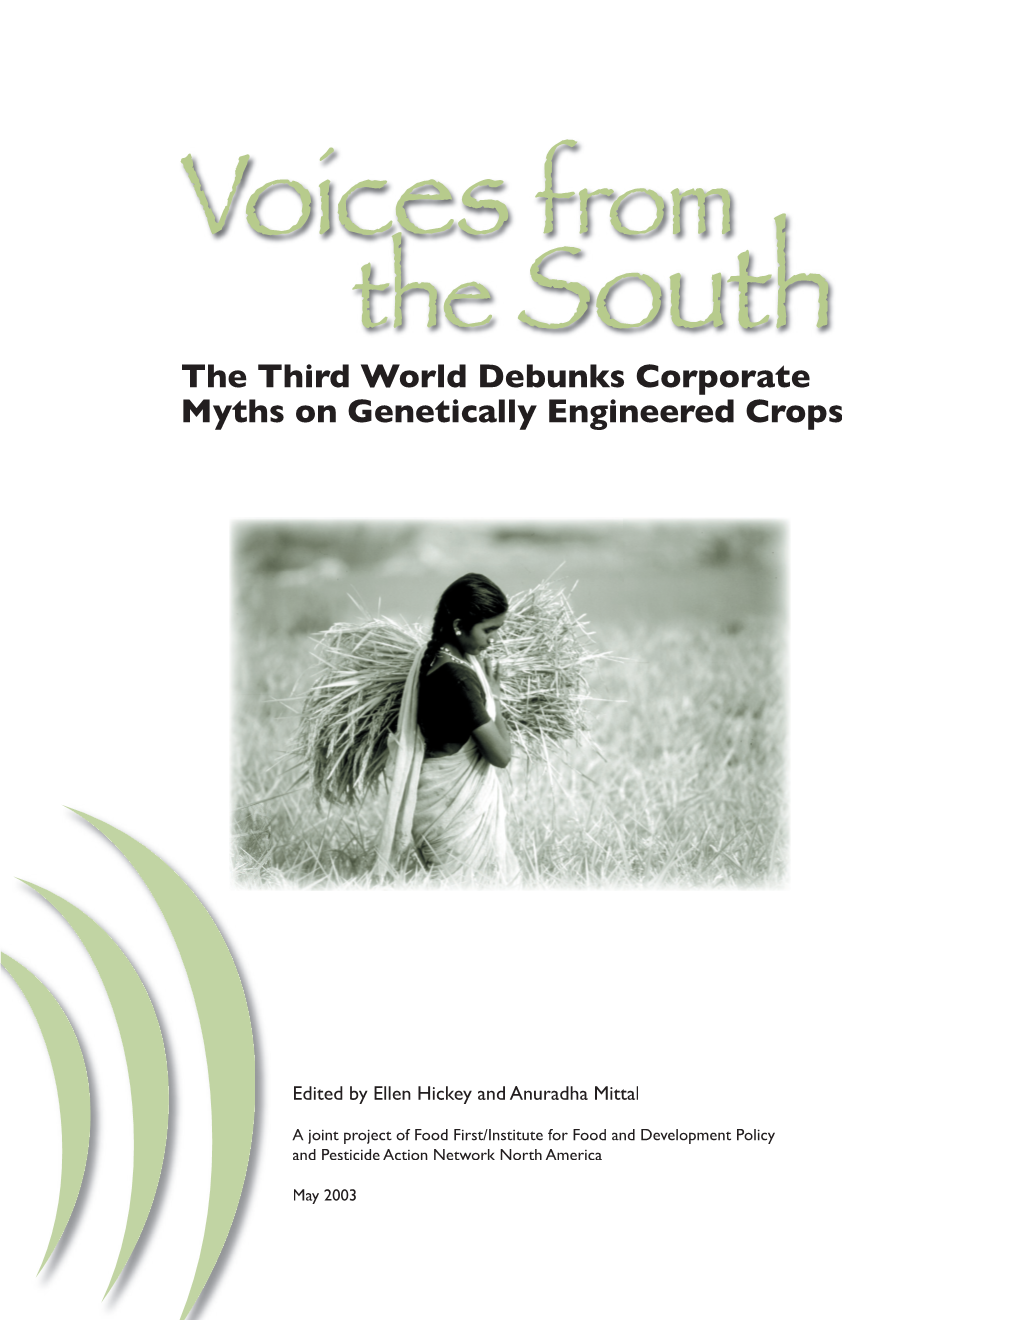 The Third World Debunks Corporate Myths on Genetically Engineered Crops